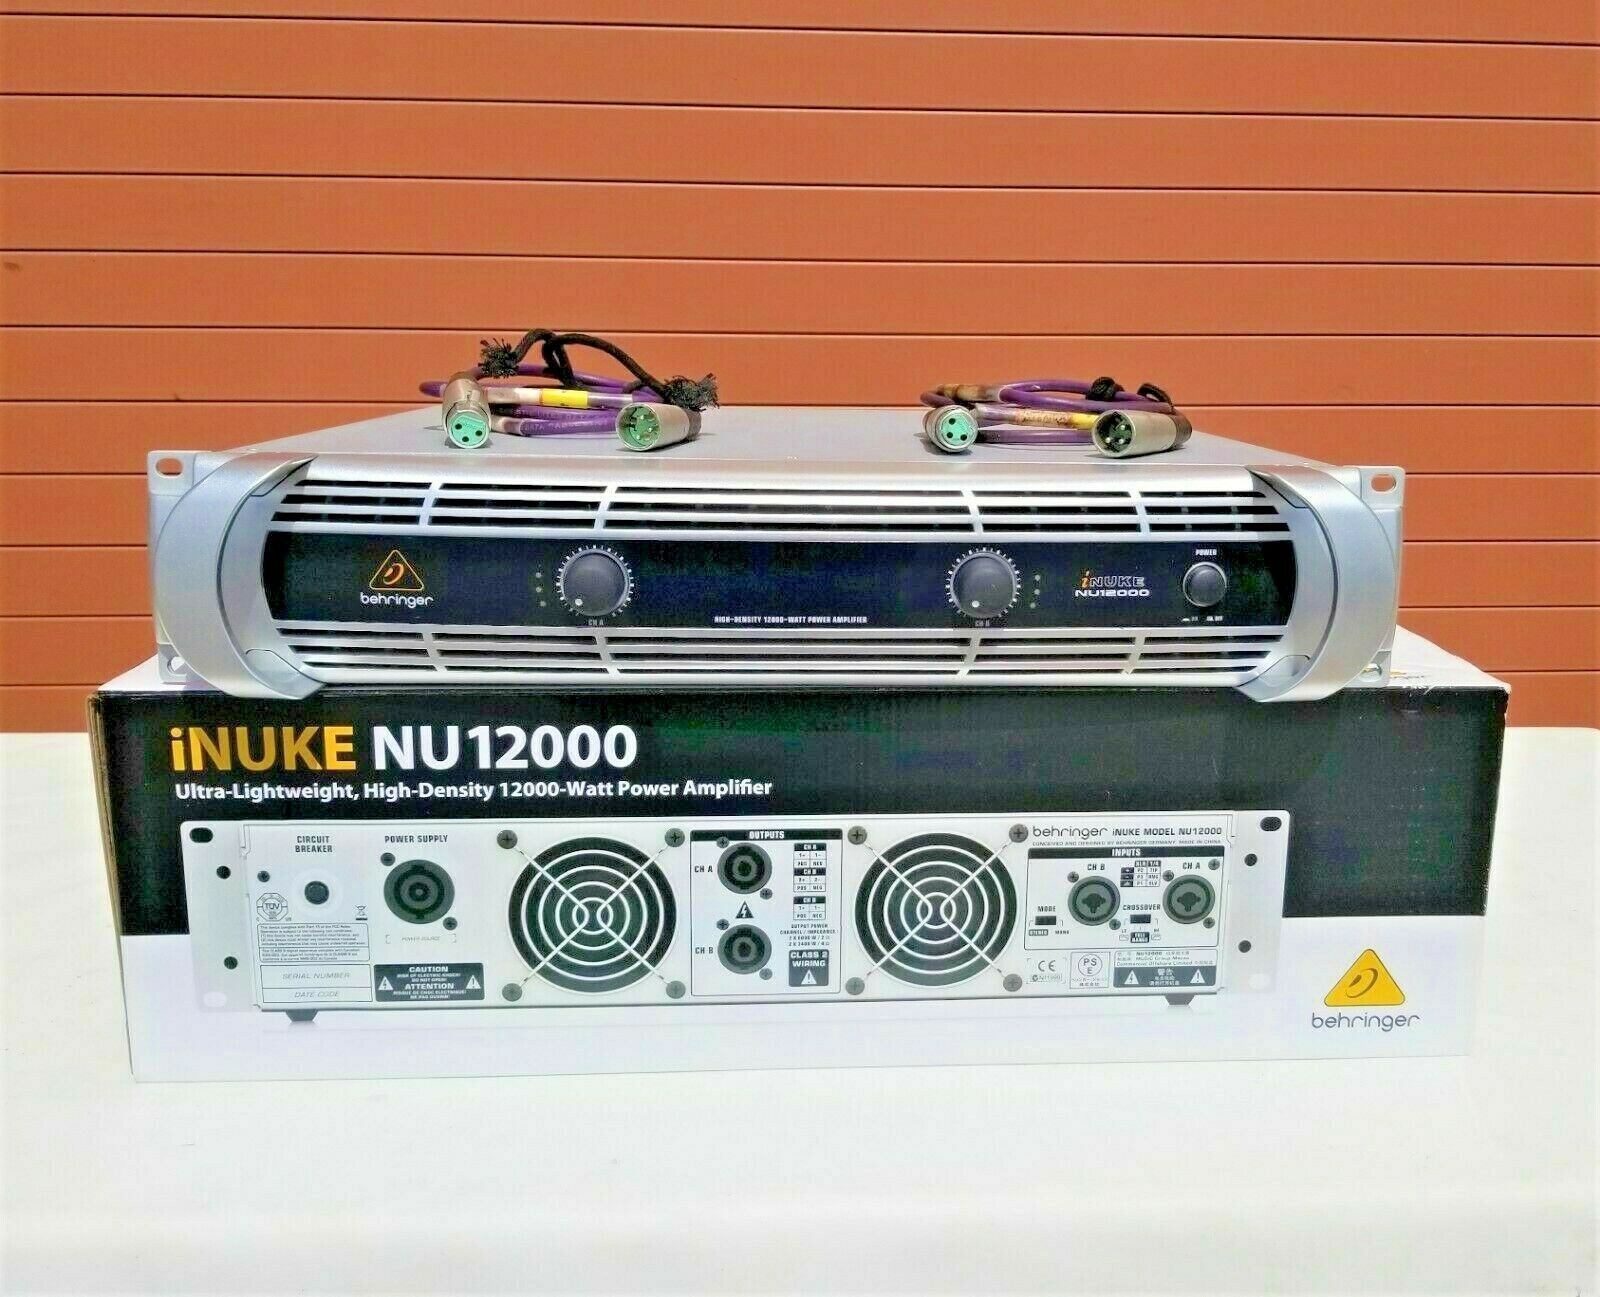 Behringer Nu12000 Inuke 12000w Power Amplifier W/(2) 4ft Xlr Cable (one)